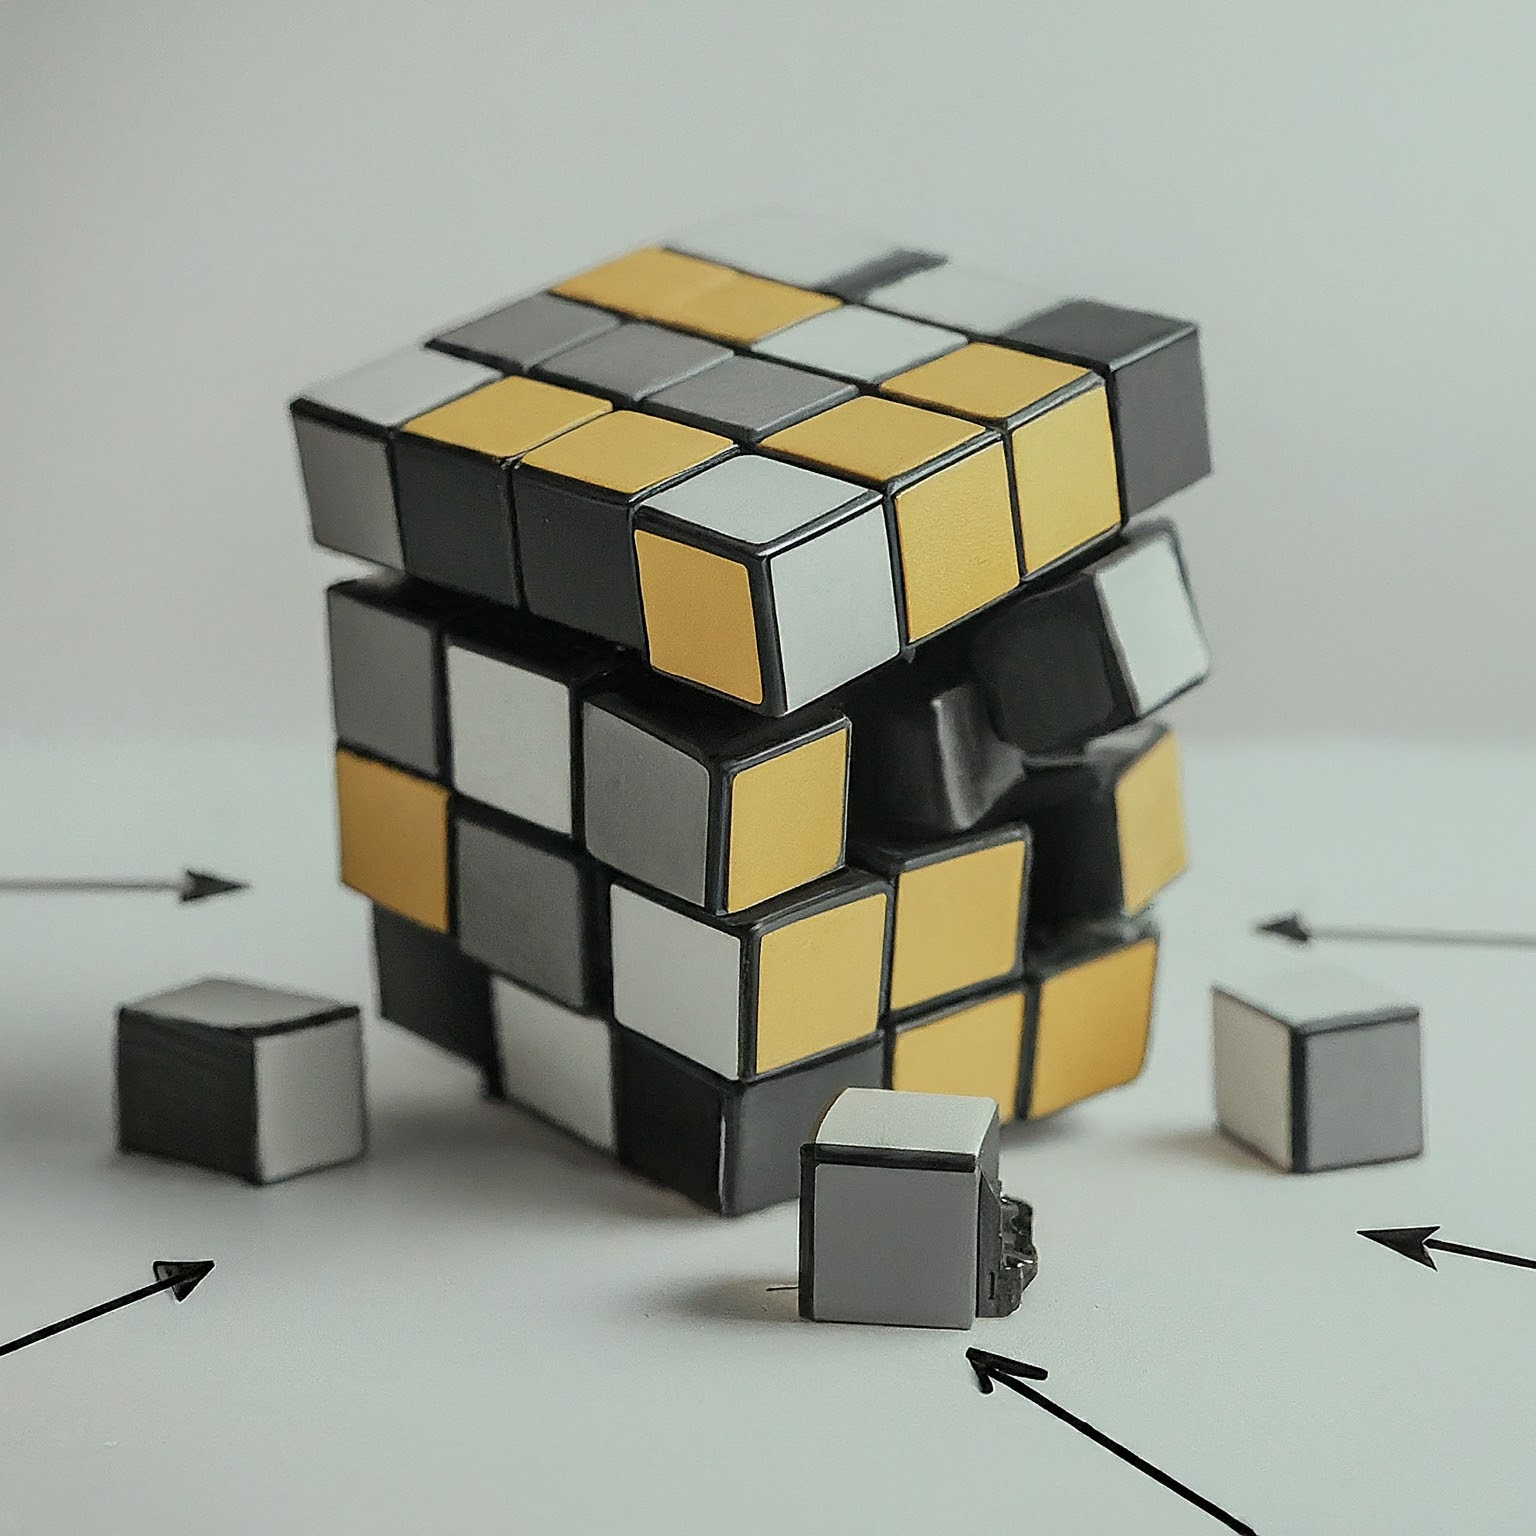 Disassembled Rubik's cube with scattered squares on white background represents overfitting in machine learning.